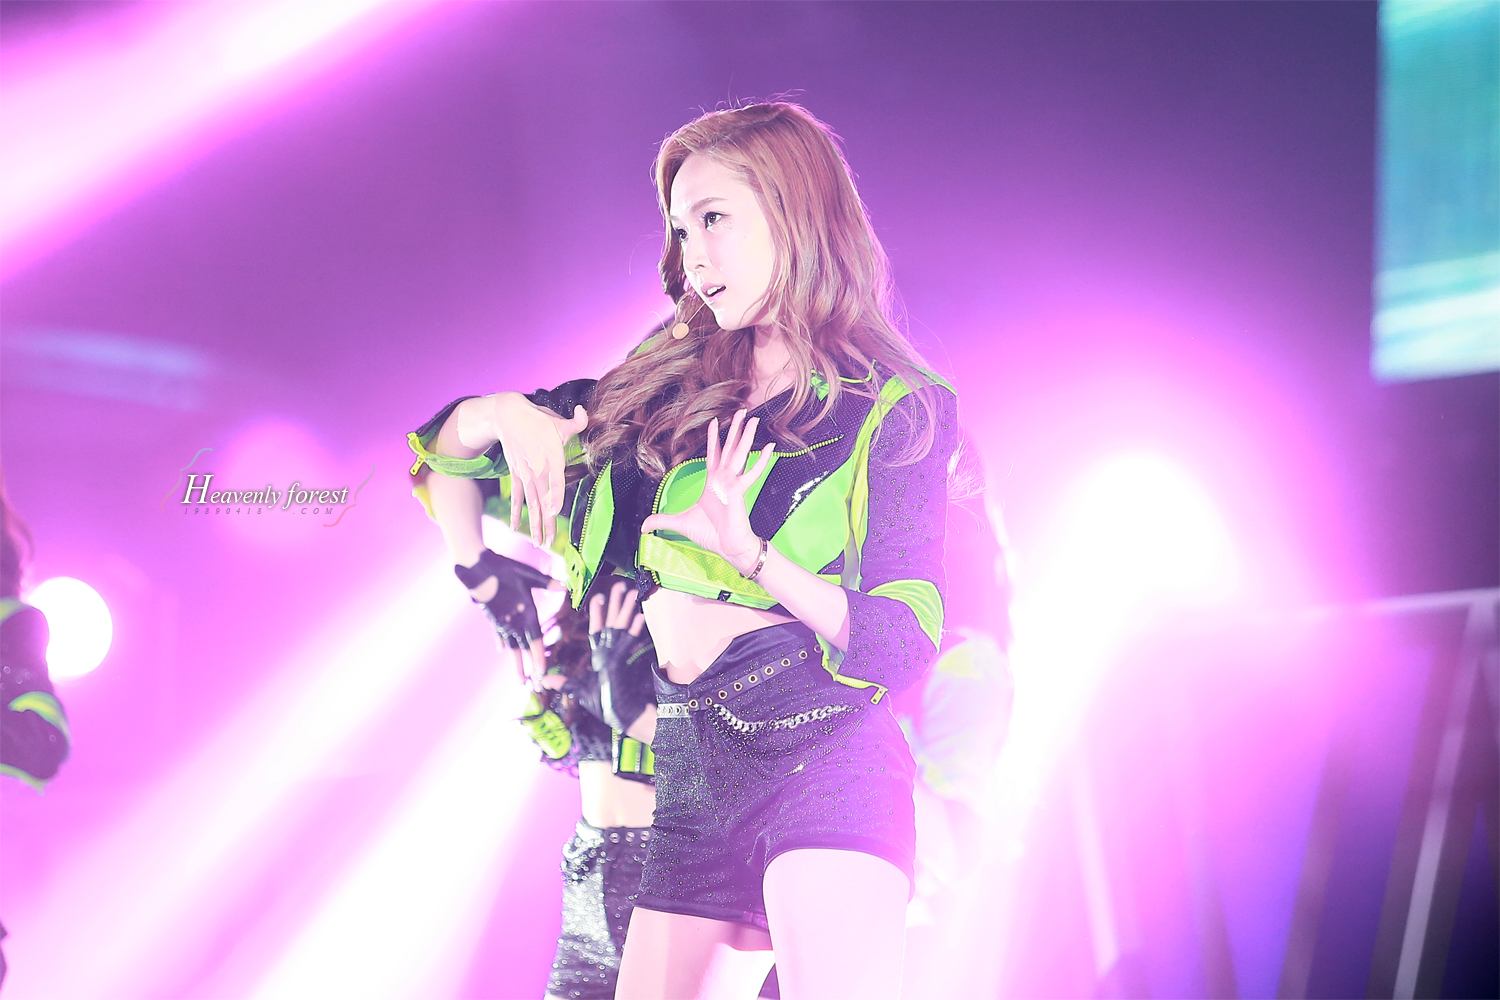 Jessica_130608_Heavenly Forest_03.jpg